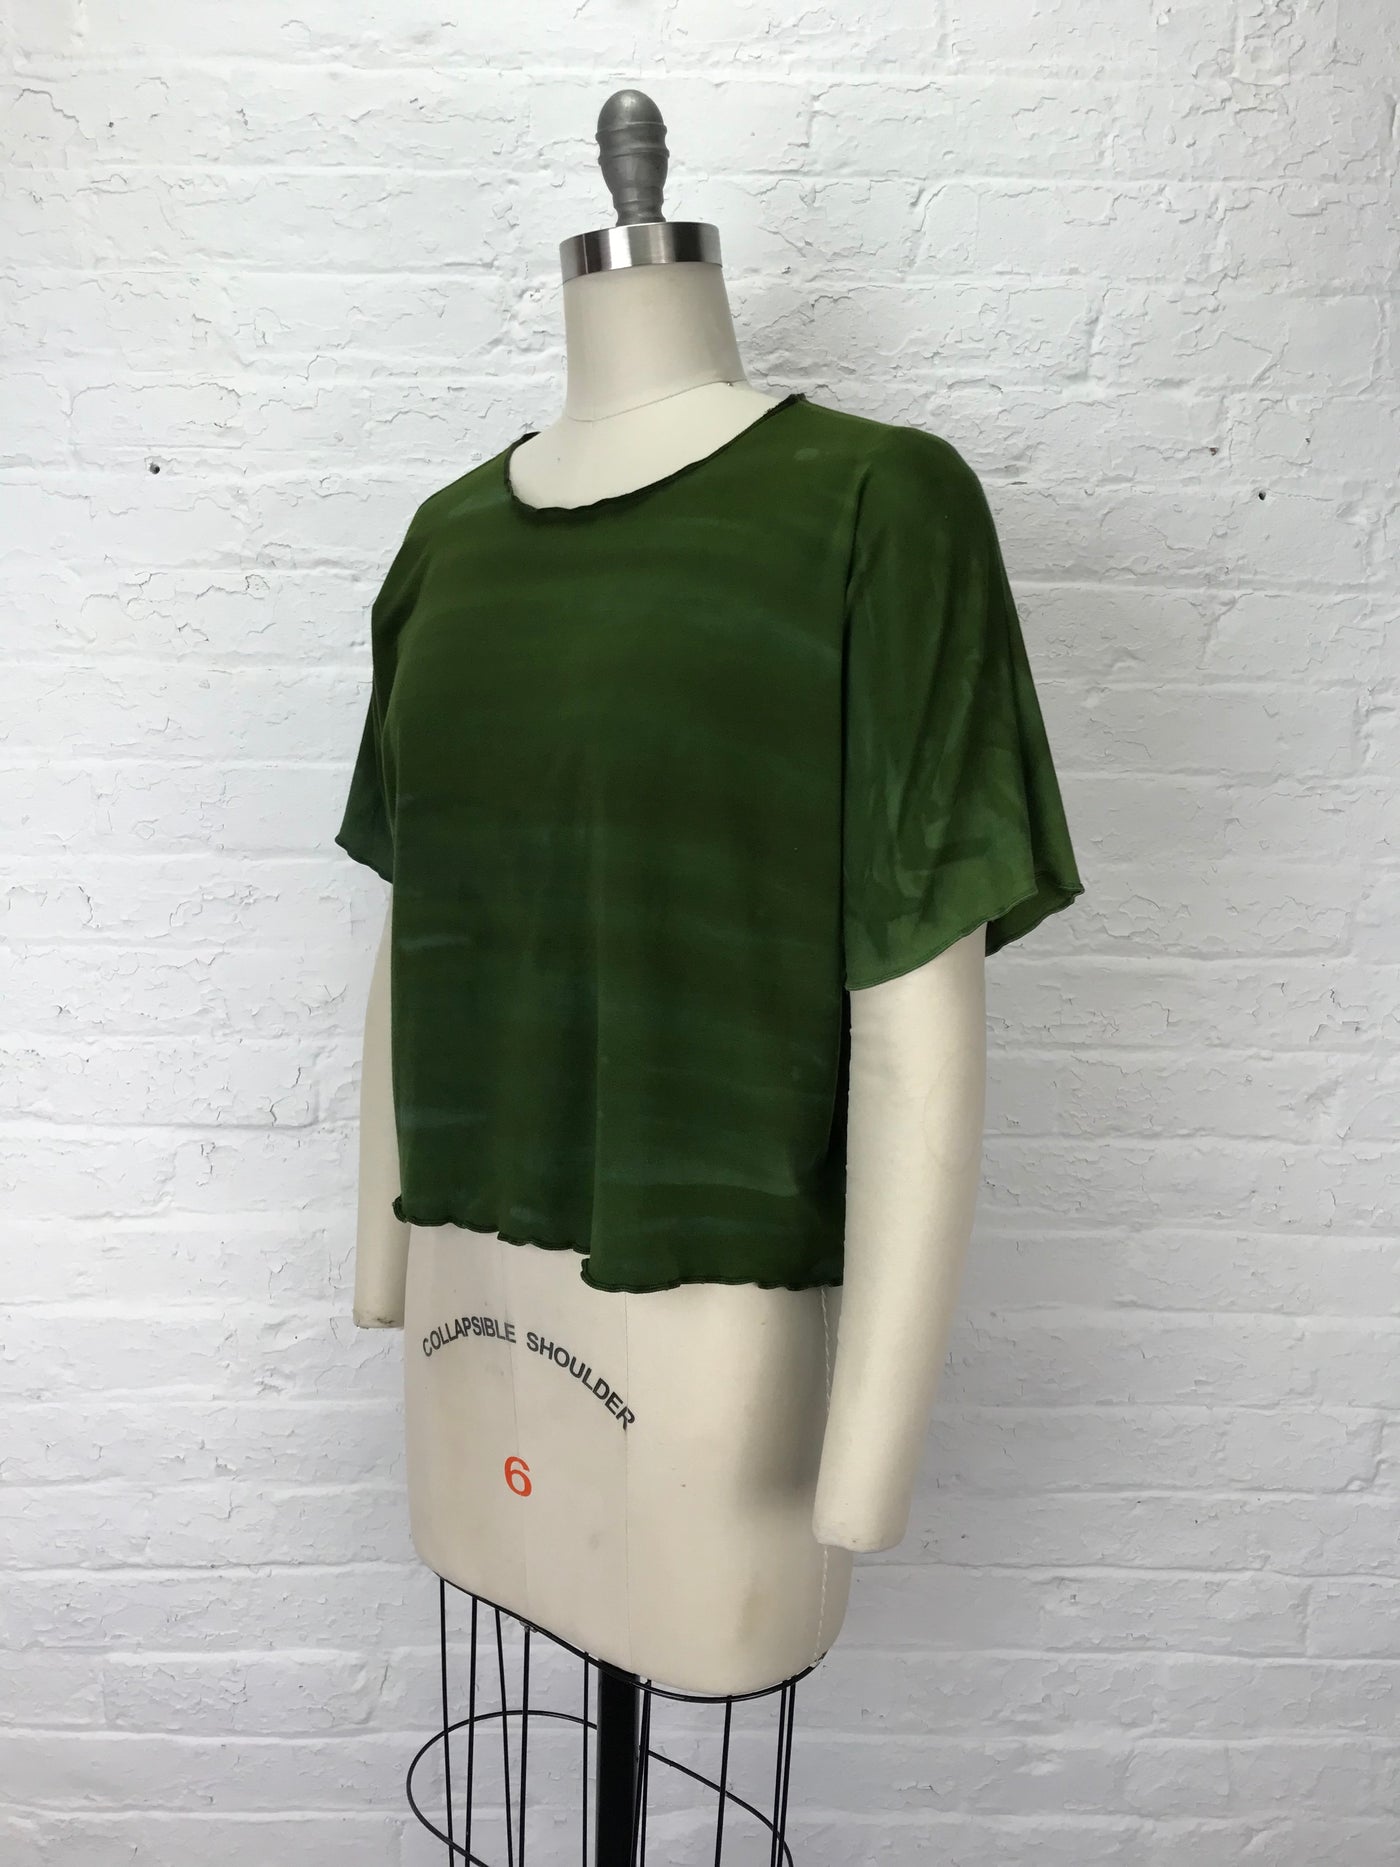 Juni Short Sleeve Top in Emerald Forest - One size